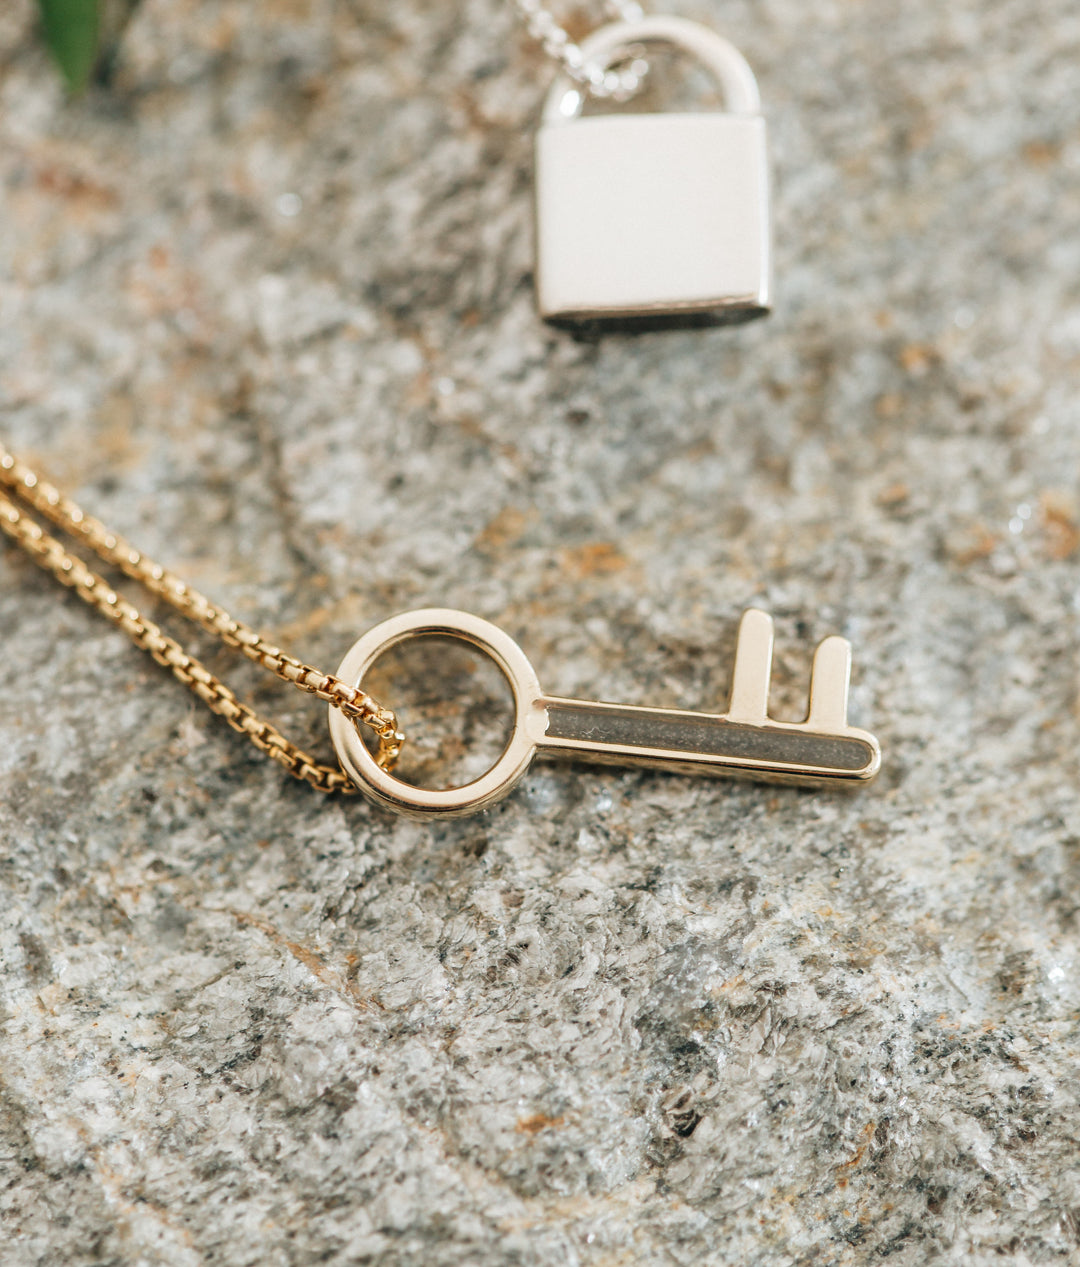 Pictured here is close by me jewelry's Key Cremains Necklace design in 14K Yellow Gold lying flat on a multi-colored textured surface next to the Sterling Silver Lock Cremation Pendant